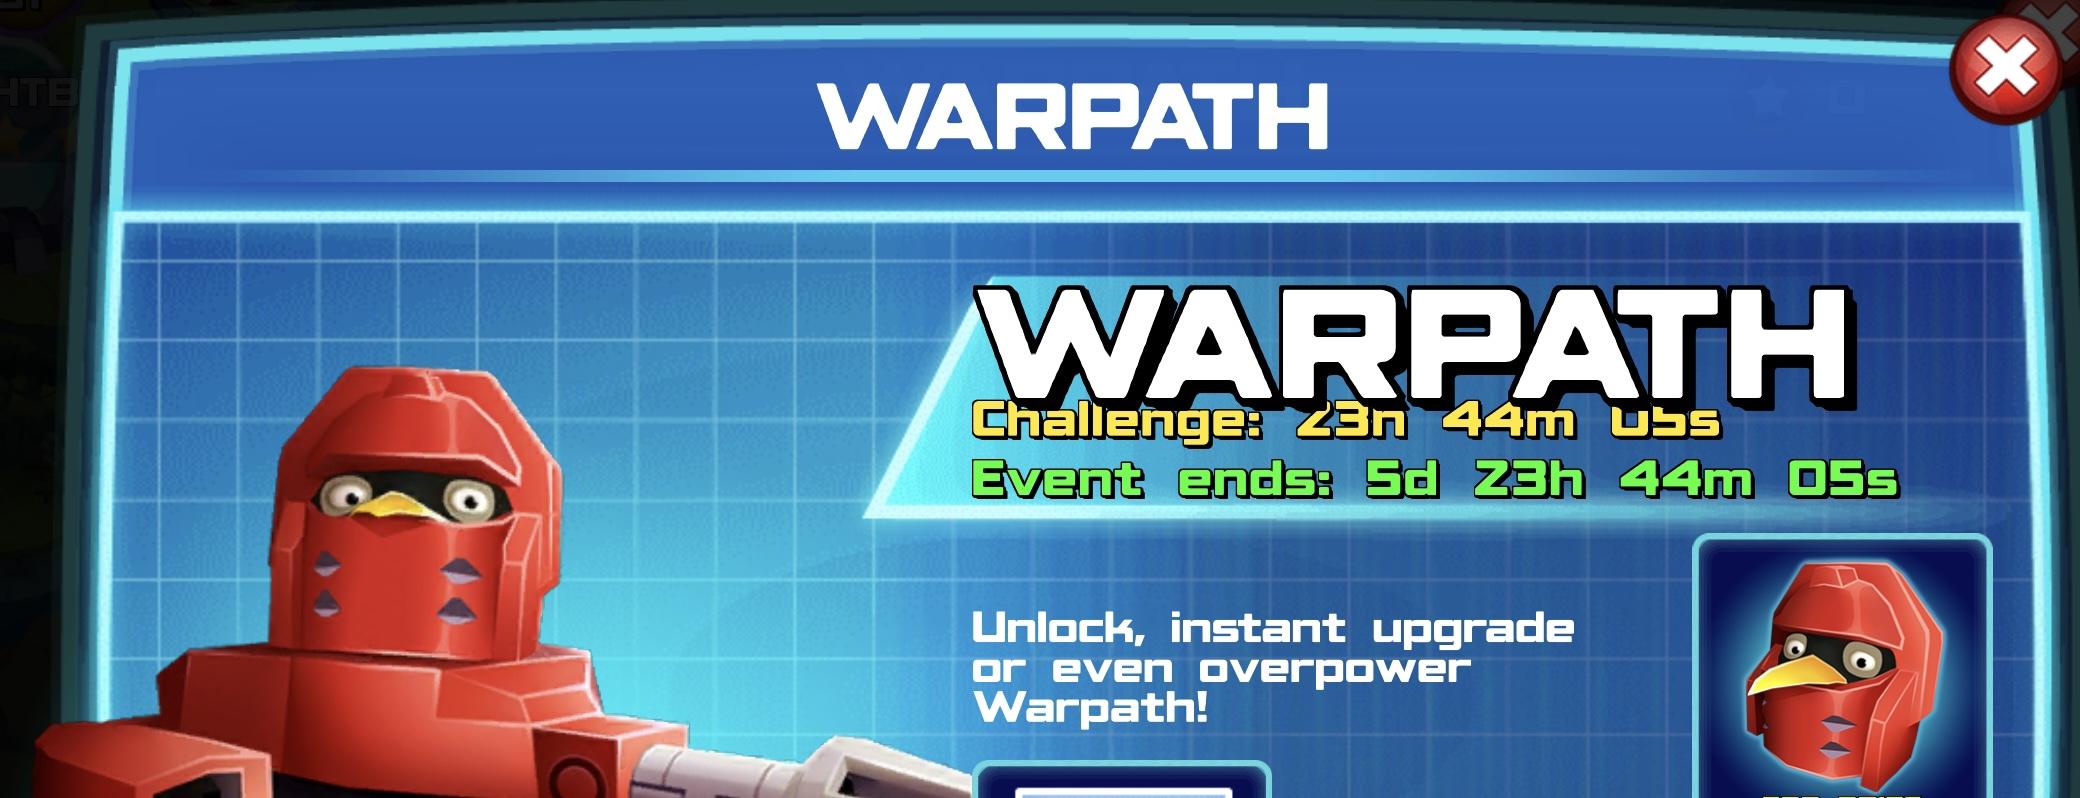 The event banner for Warpath